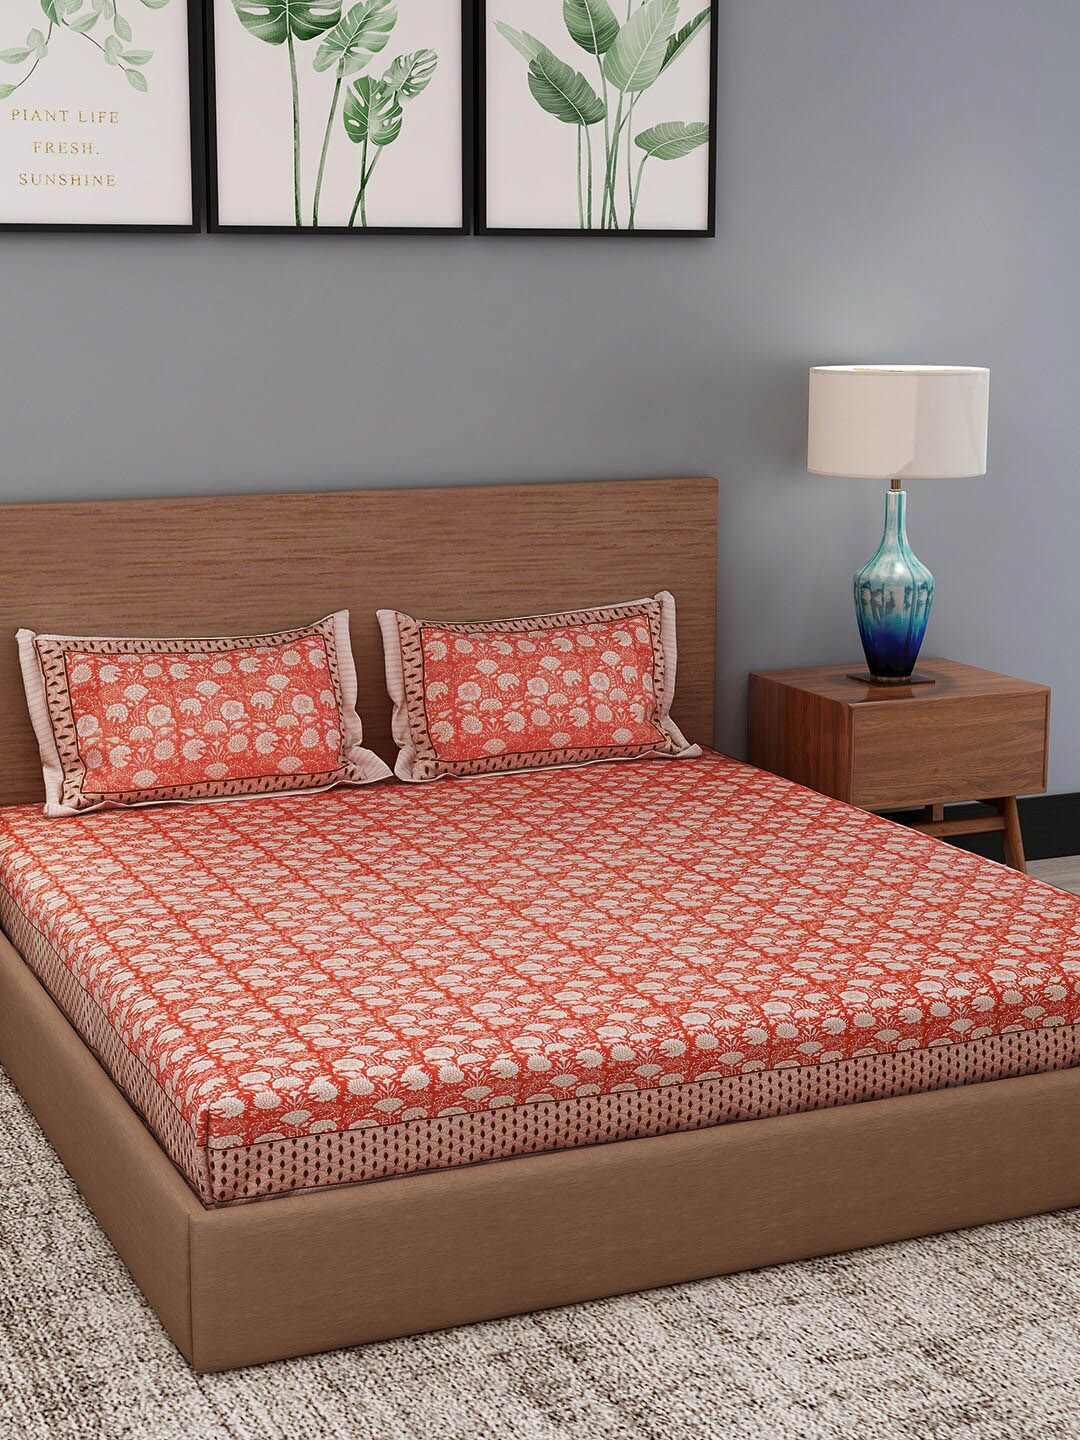 Rajasthan Decor Orange & White 144 TC Floral Cotton King Bedsheet with 2 Pillow Covers Price in India